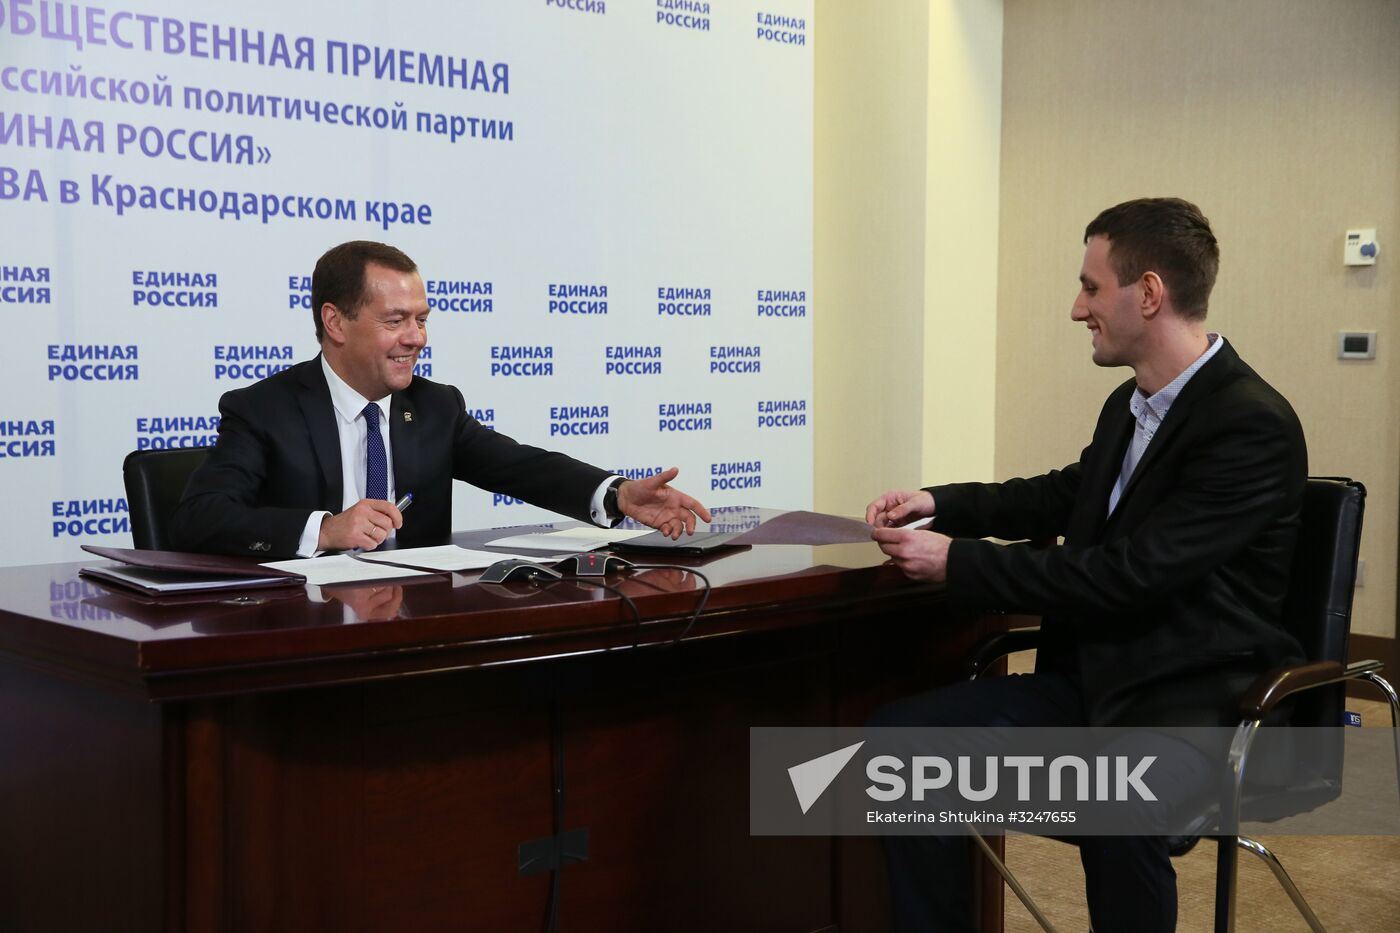 PM Dmitry Medvedev receives citizens at United Russia Party's reception office in Sochi